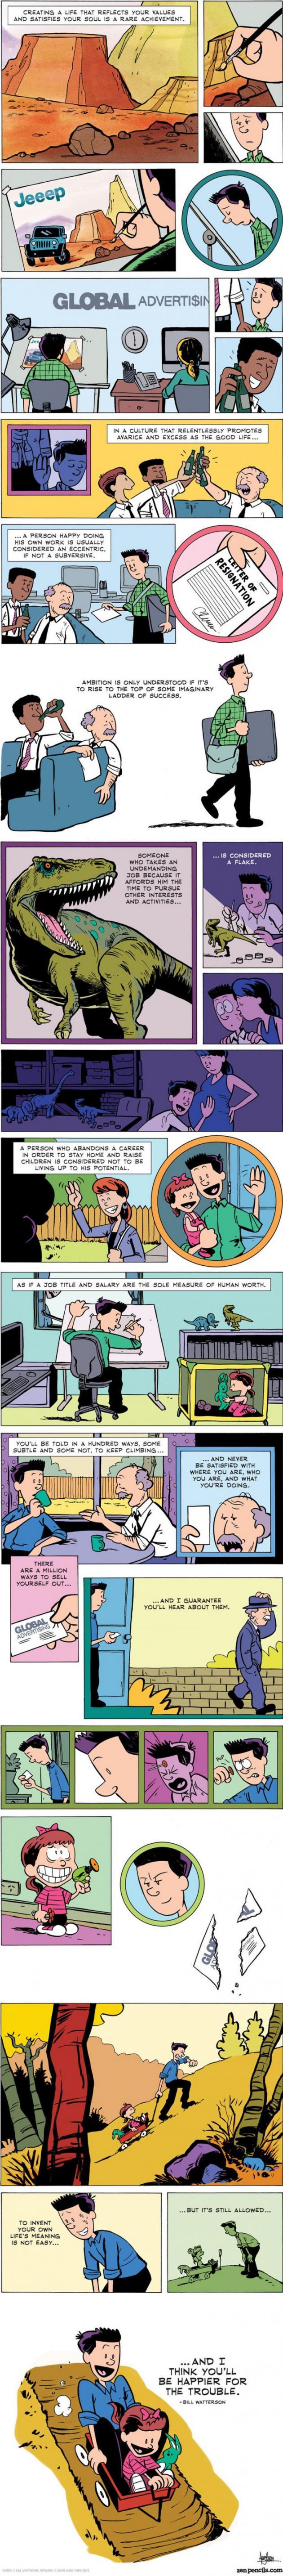 Illustrated Advice From Bill Watterson (Creator of Calvin and Hobbes)